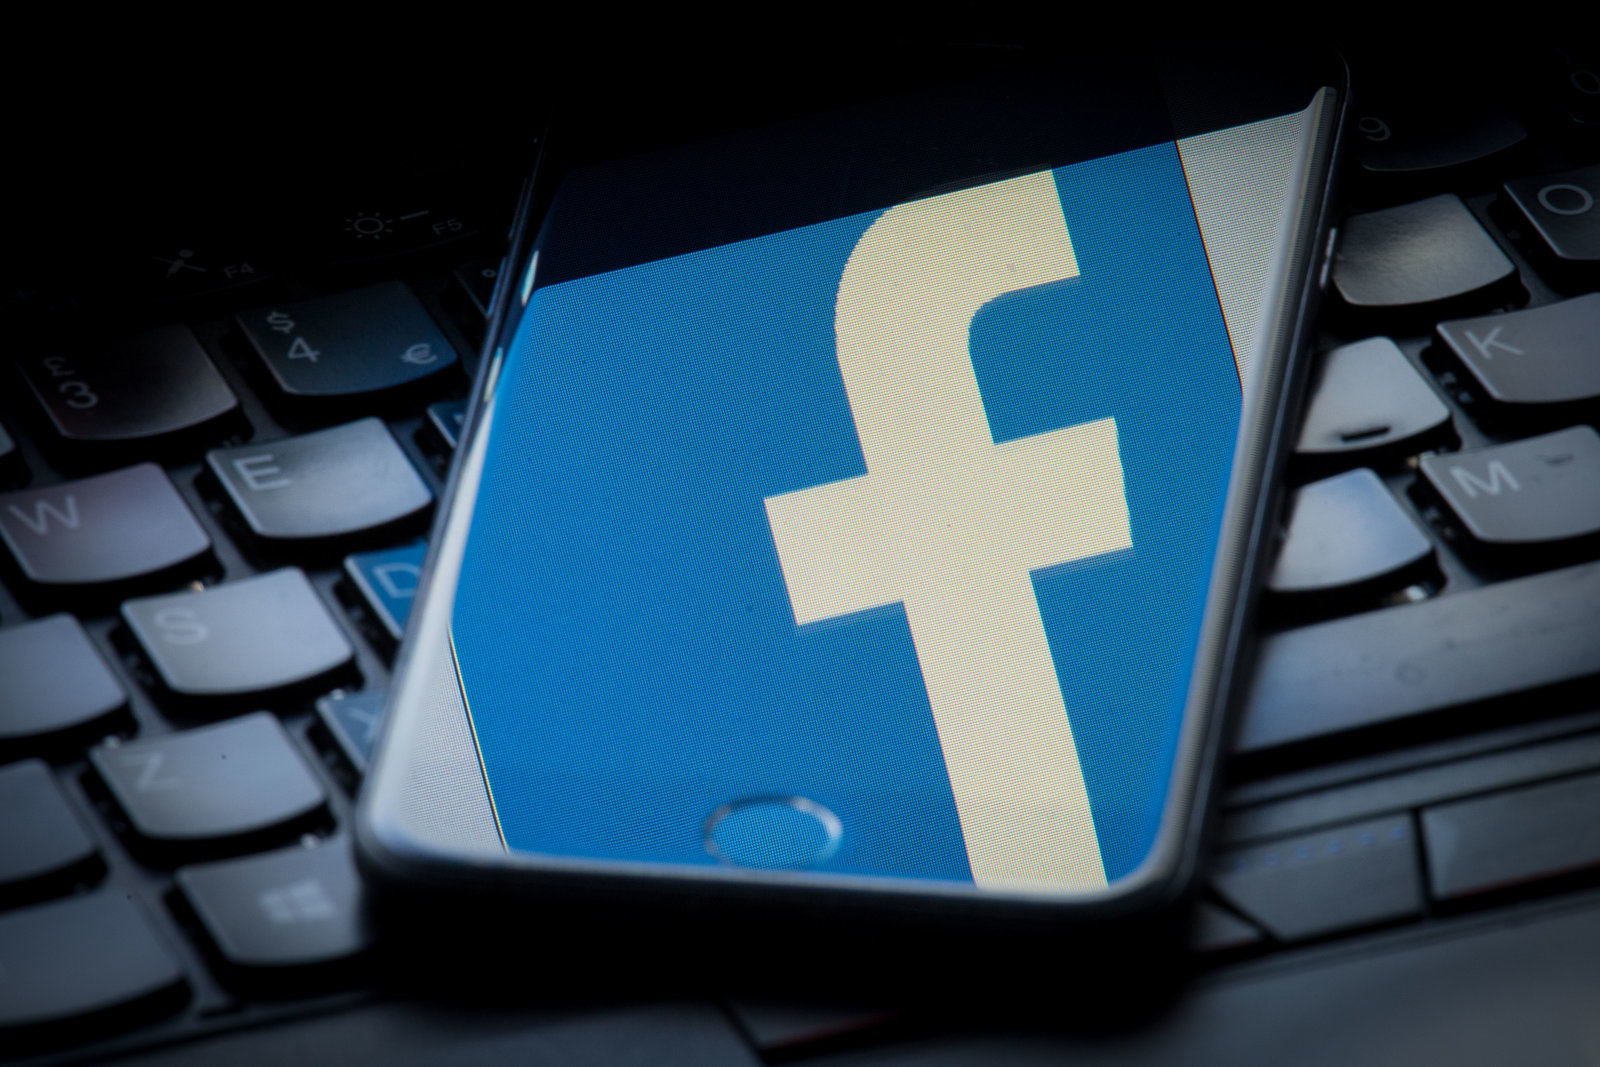 The logo of social networking site Facebook is reflected on the screen of a smartphone resting on a laptop keyboard. (Photo by Dominic Lipinski/PA Images via Getty Images)